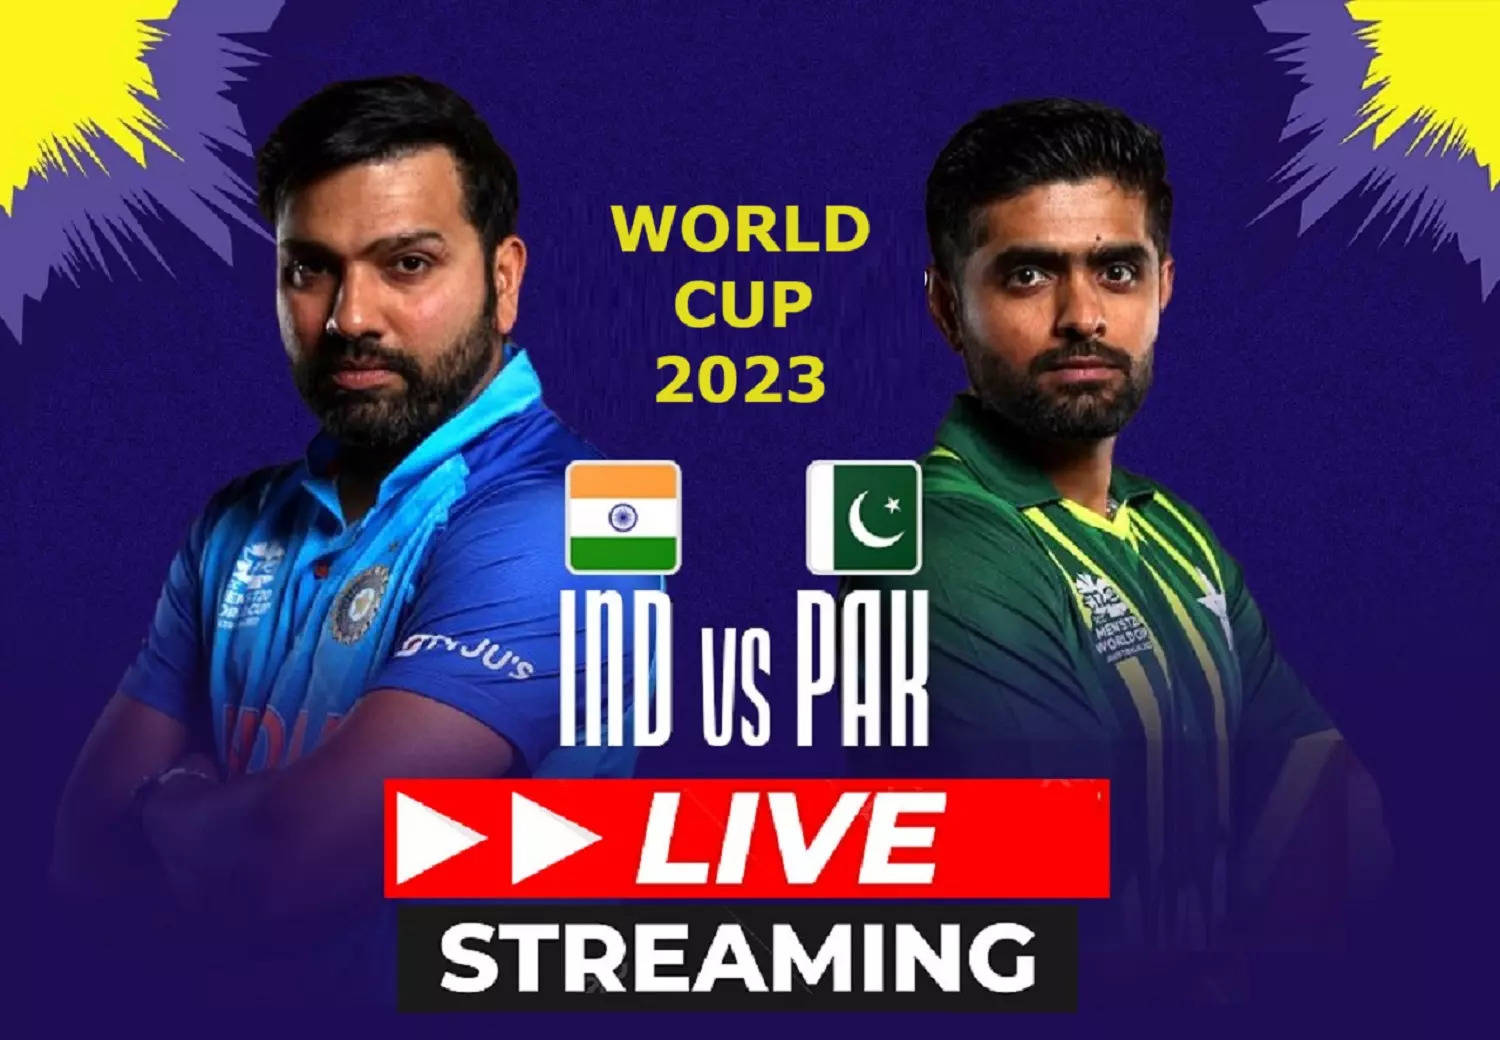 Ind Vs Pak Live Tv Streaming Online Free Watch Icc Odi Cricket World Cup 2023 On Star Sports 0235